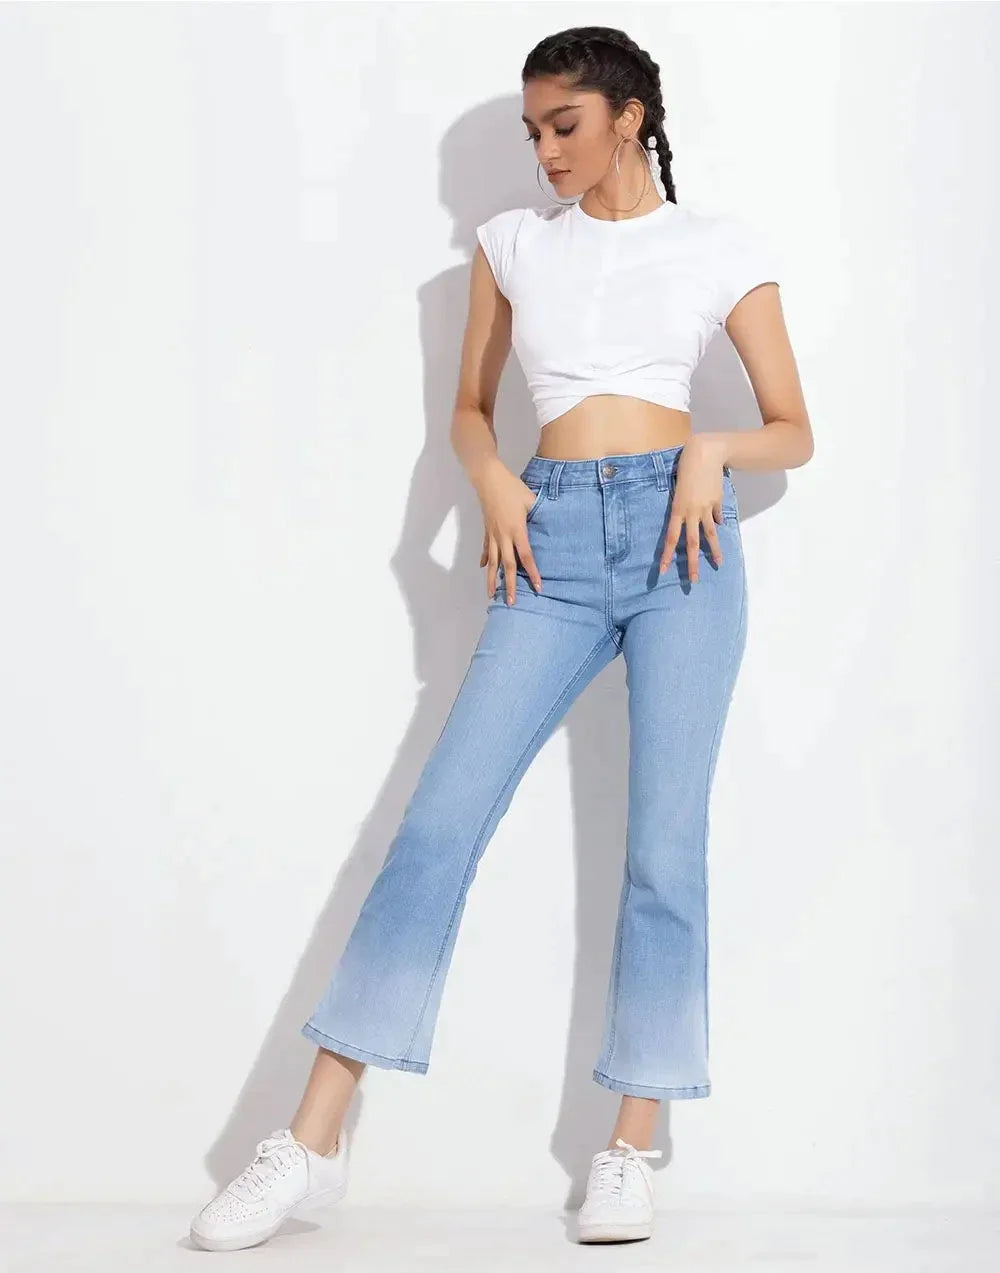 a woman in a white shirt and jeans